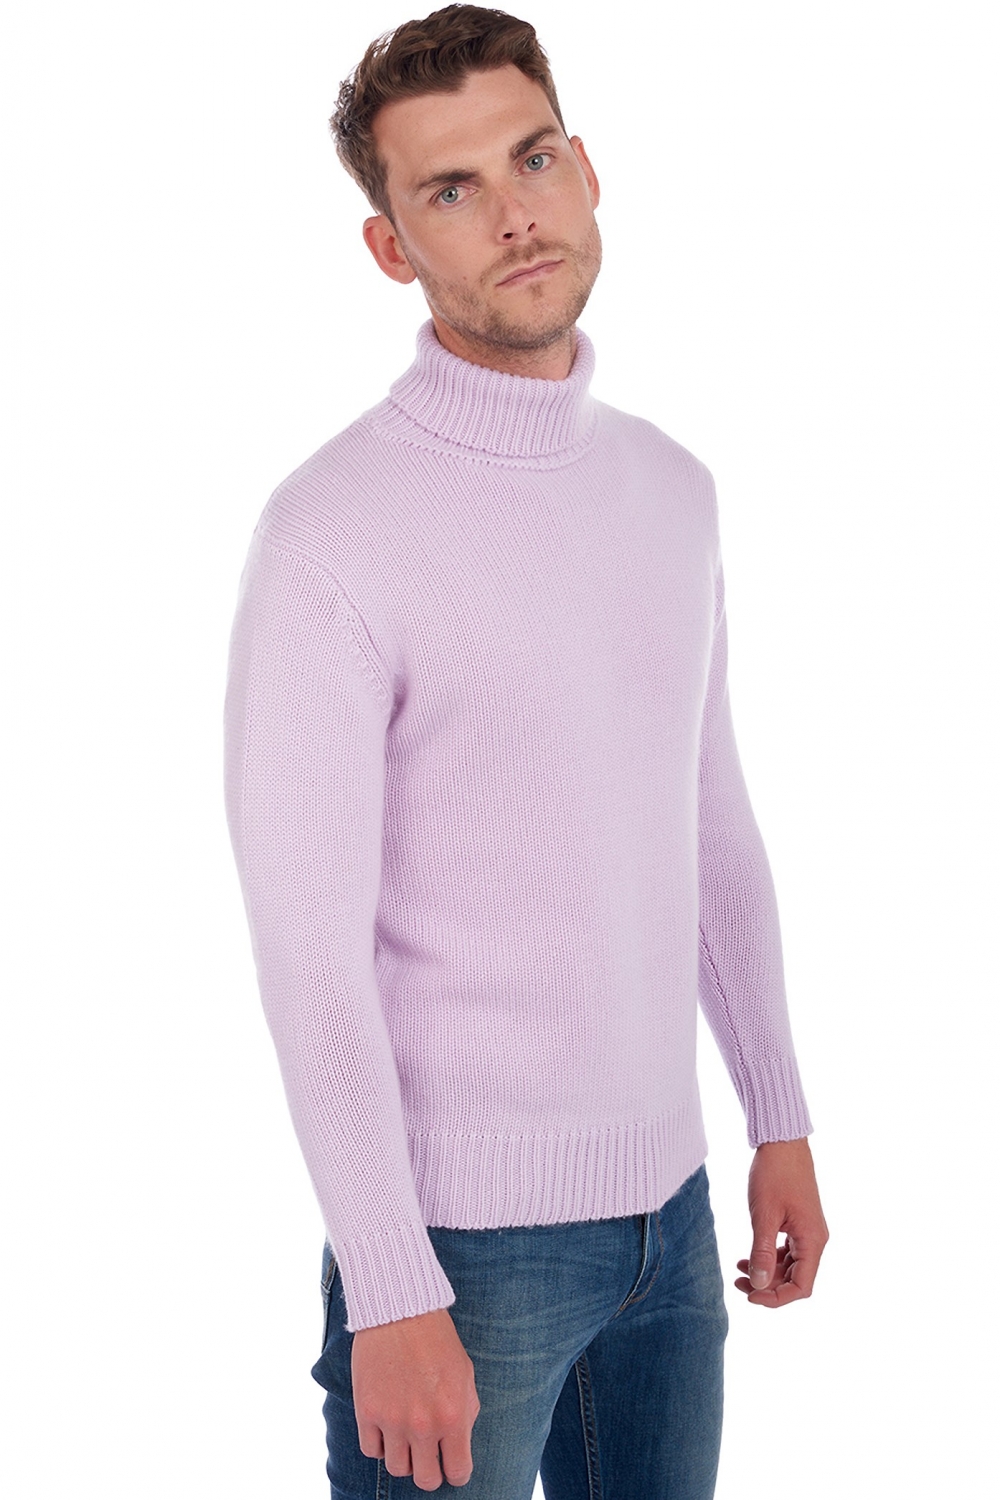 Cachemire pull homme artemi lilas m